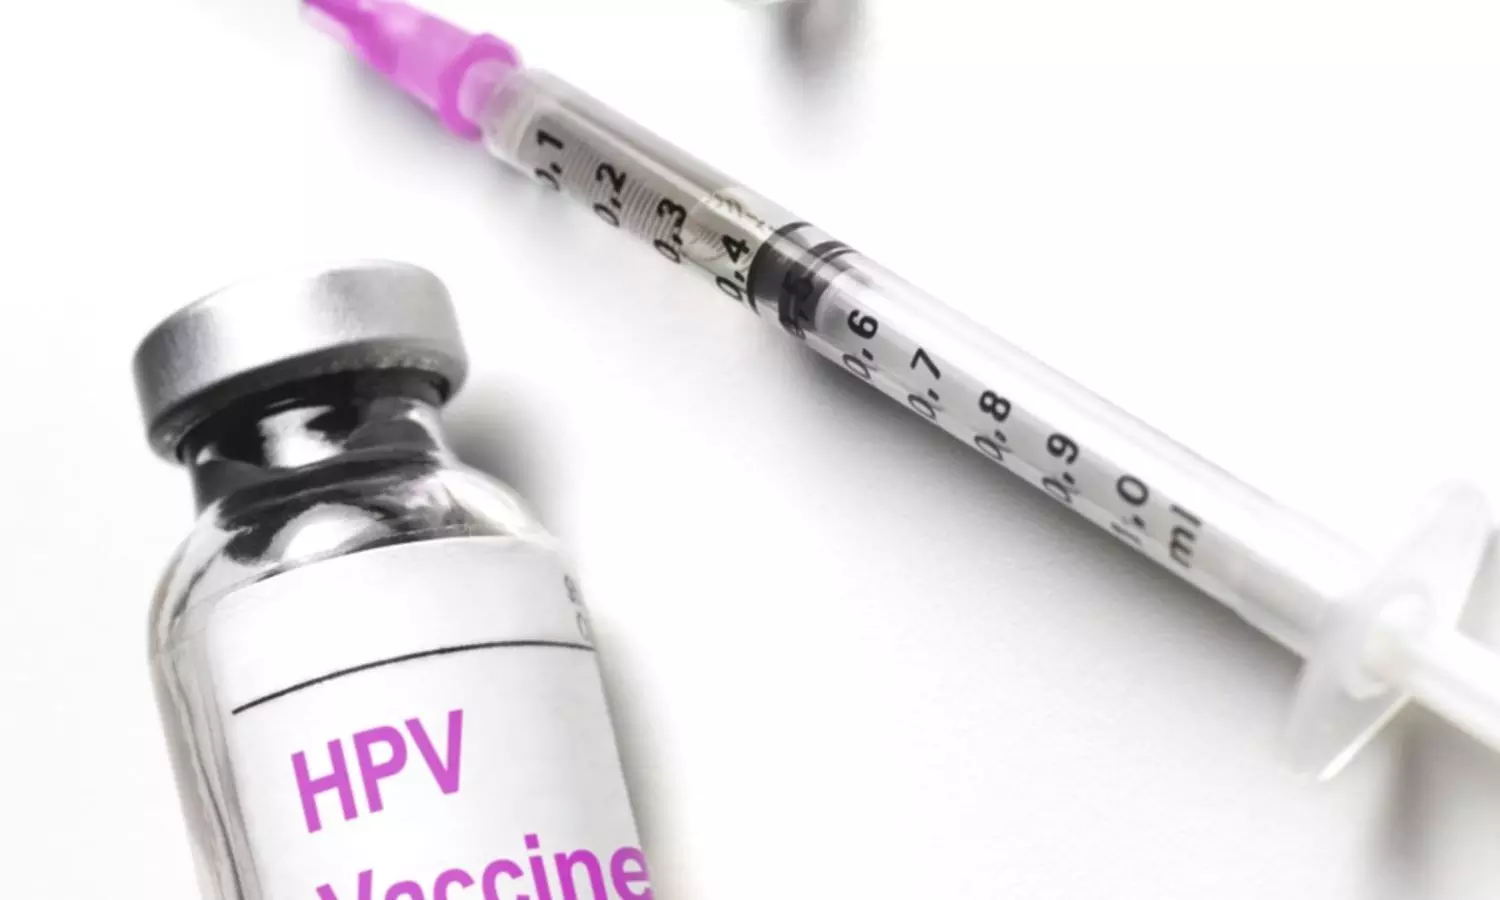 Govt likely to float global tender for HPV vaccine in April; Serum Institute, Merck may participate